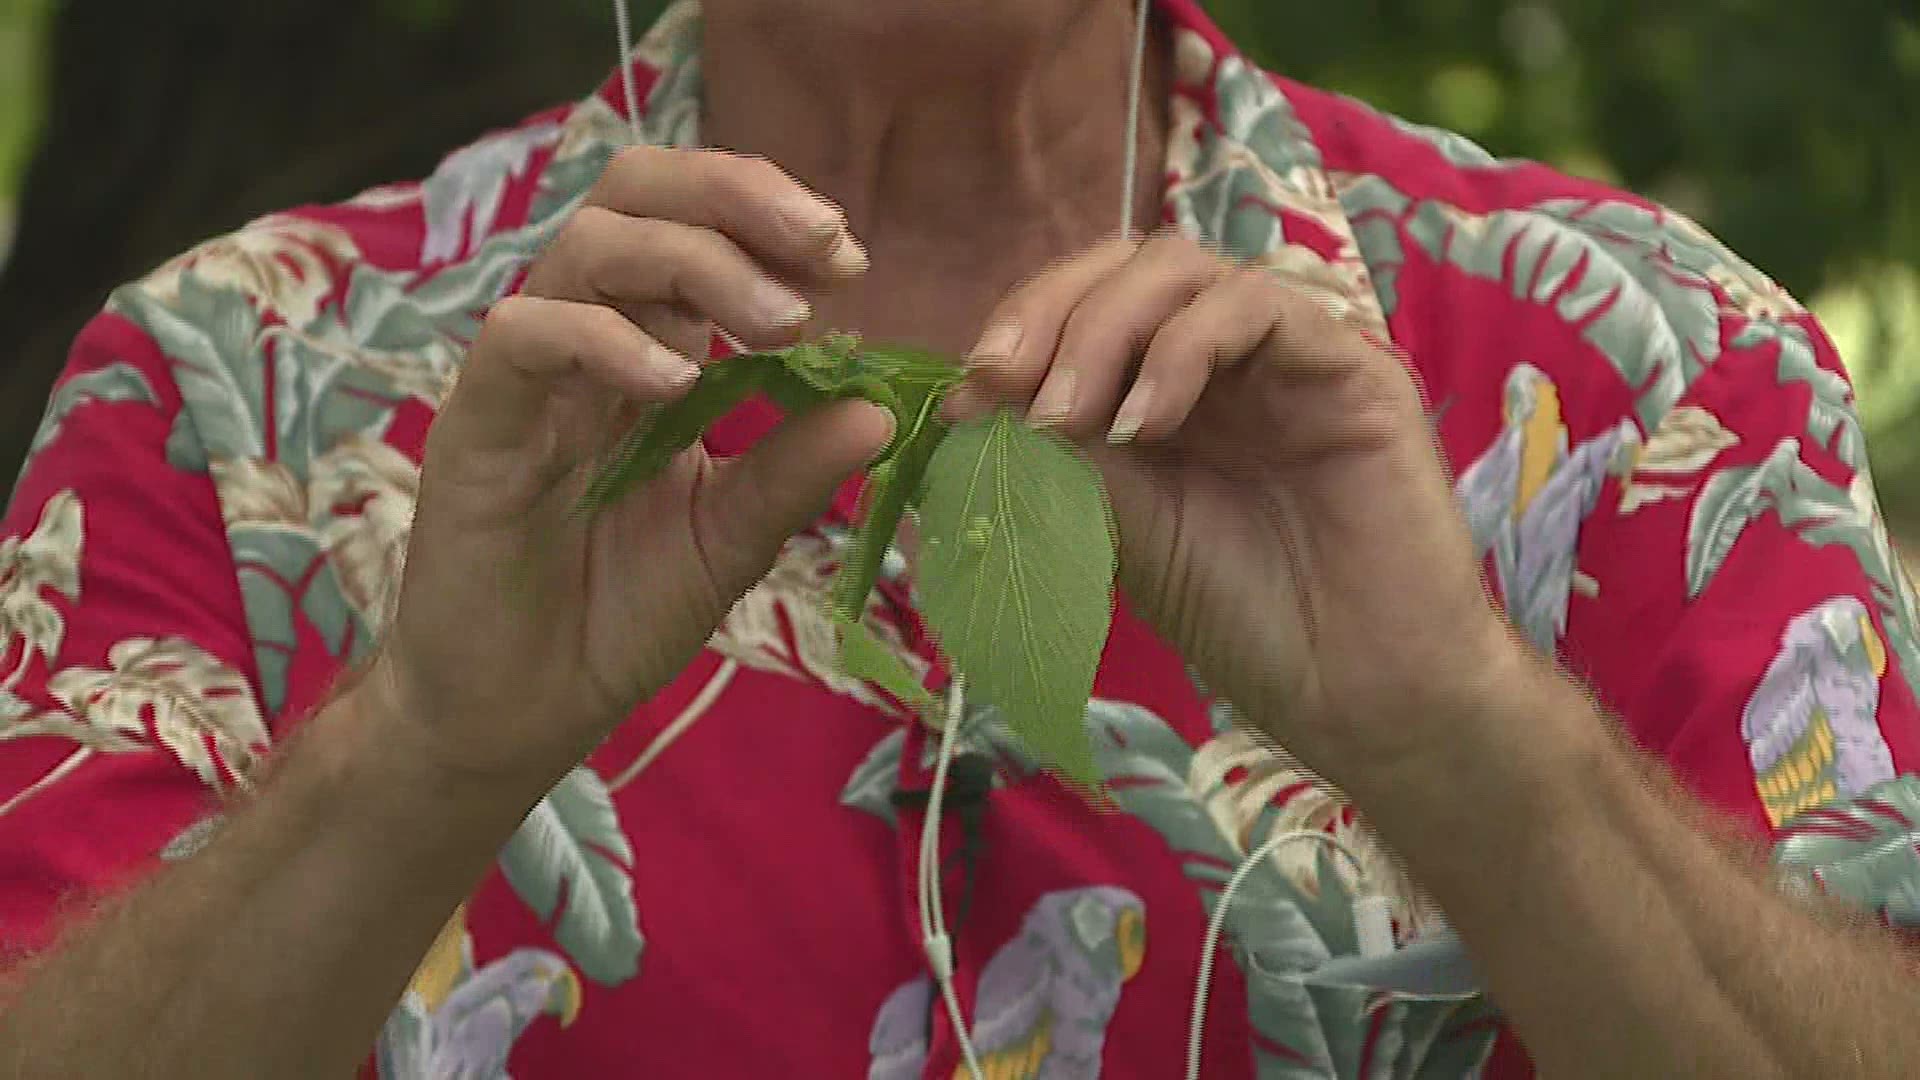 Galls on tree leaves are not harmful to the tree, says plant and gardening expert Craig Hignight.